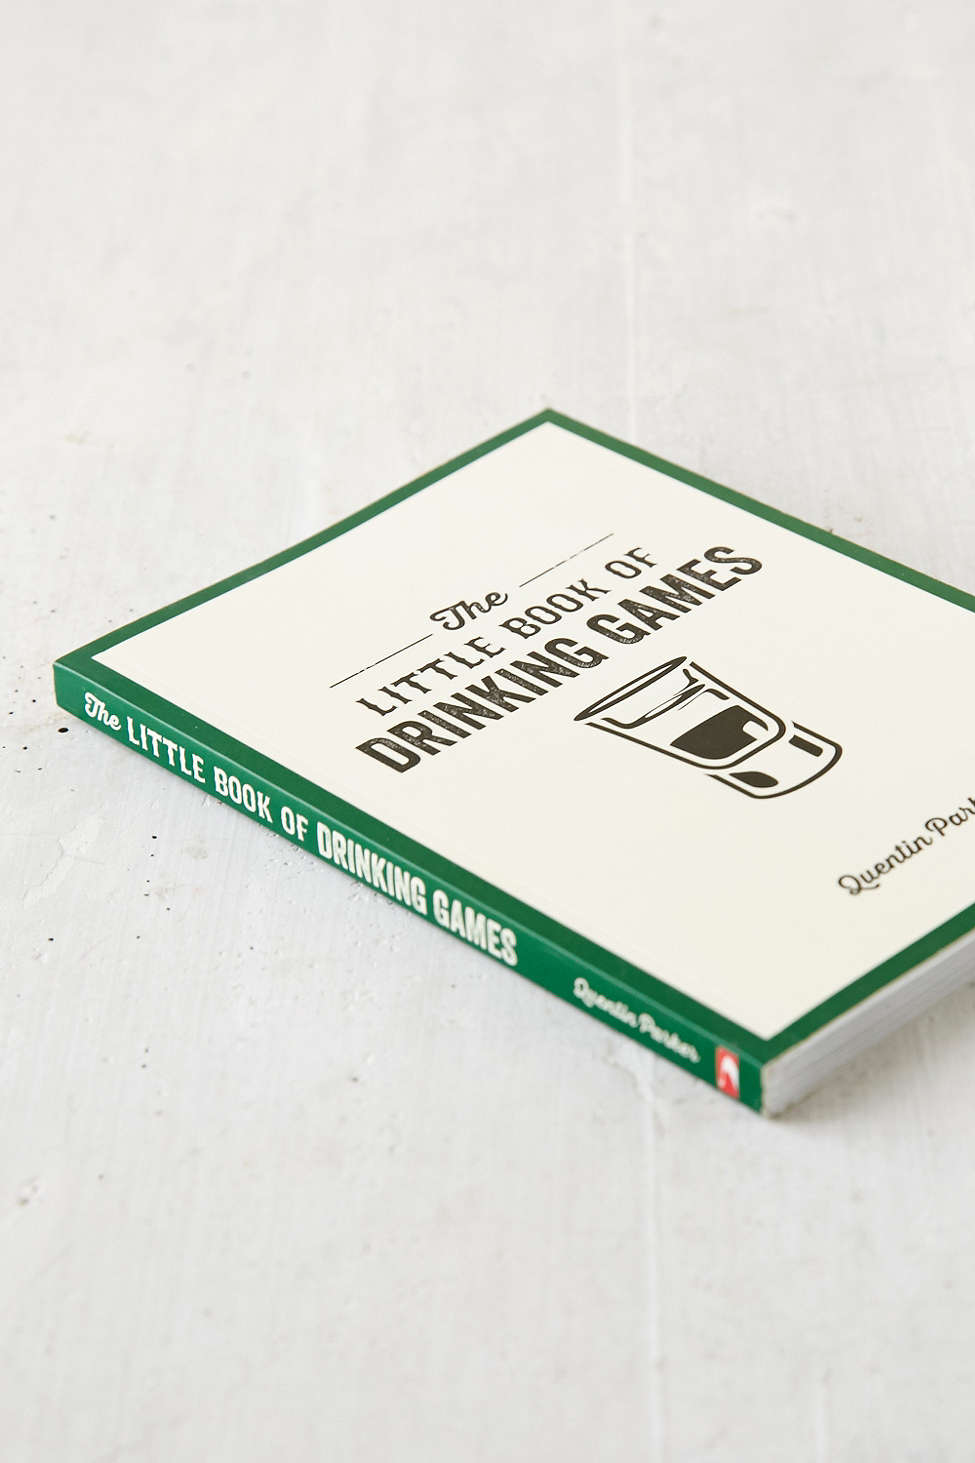 The Little Book Of Drinking Games By Quentin Parker